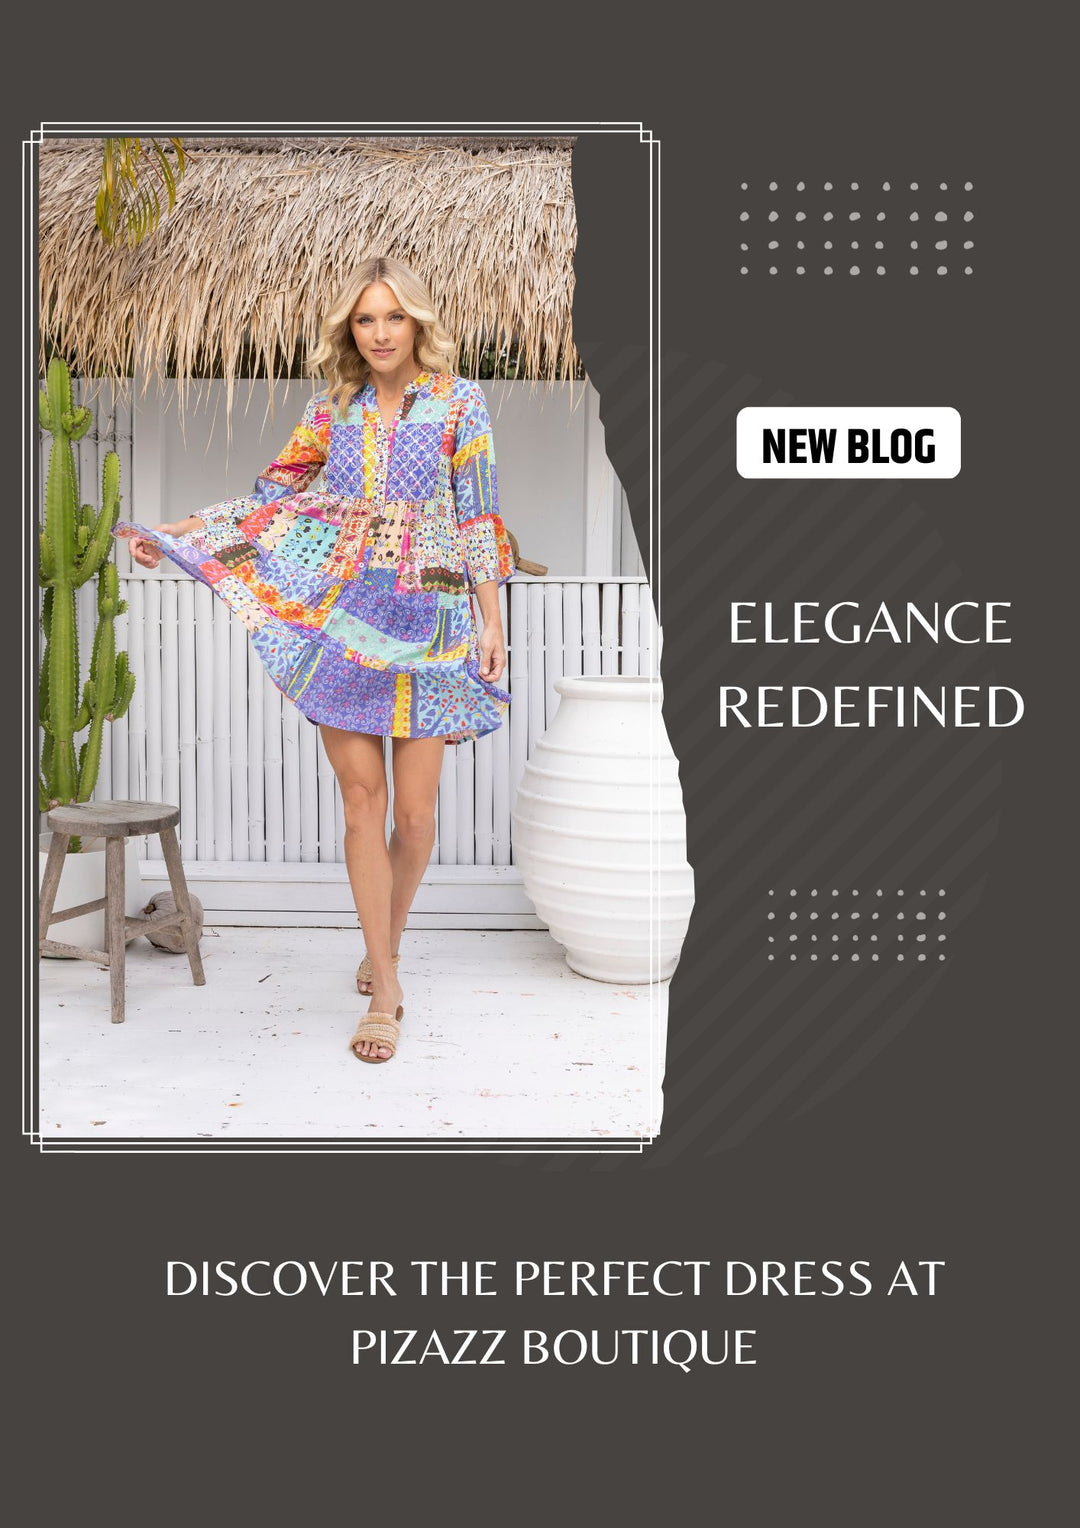 Poster of a woman wearing a dress from Pizazz Boutique for a feature of there new blog on how to discover the perfect dress